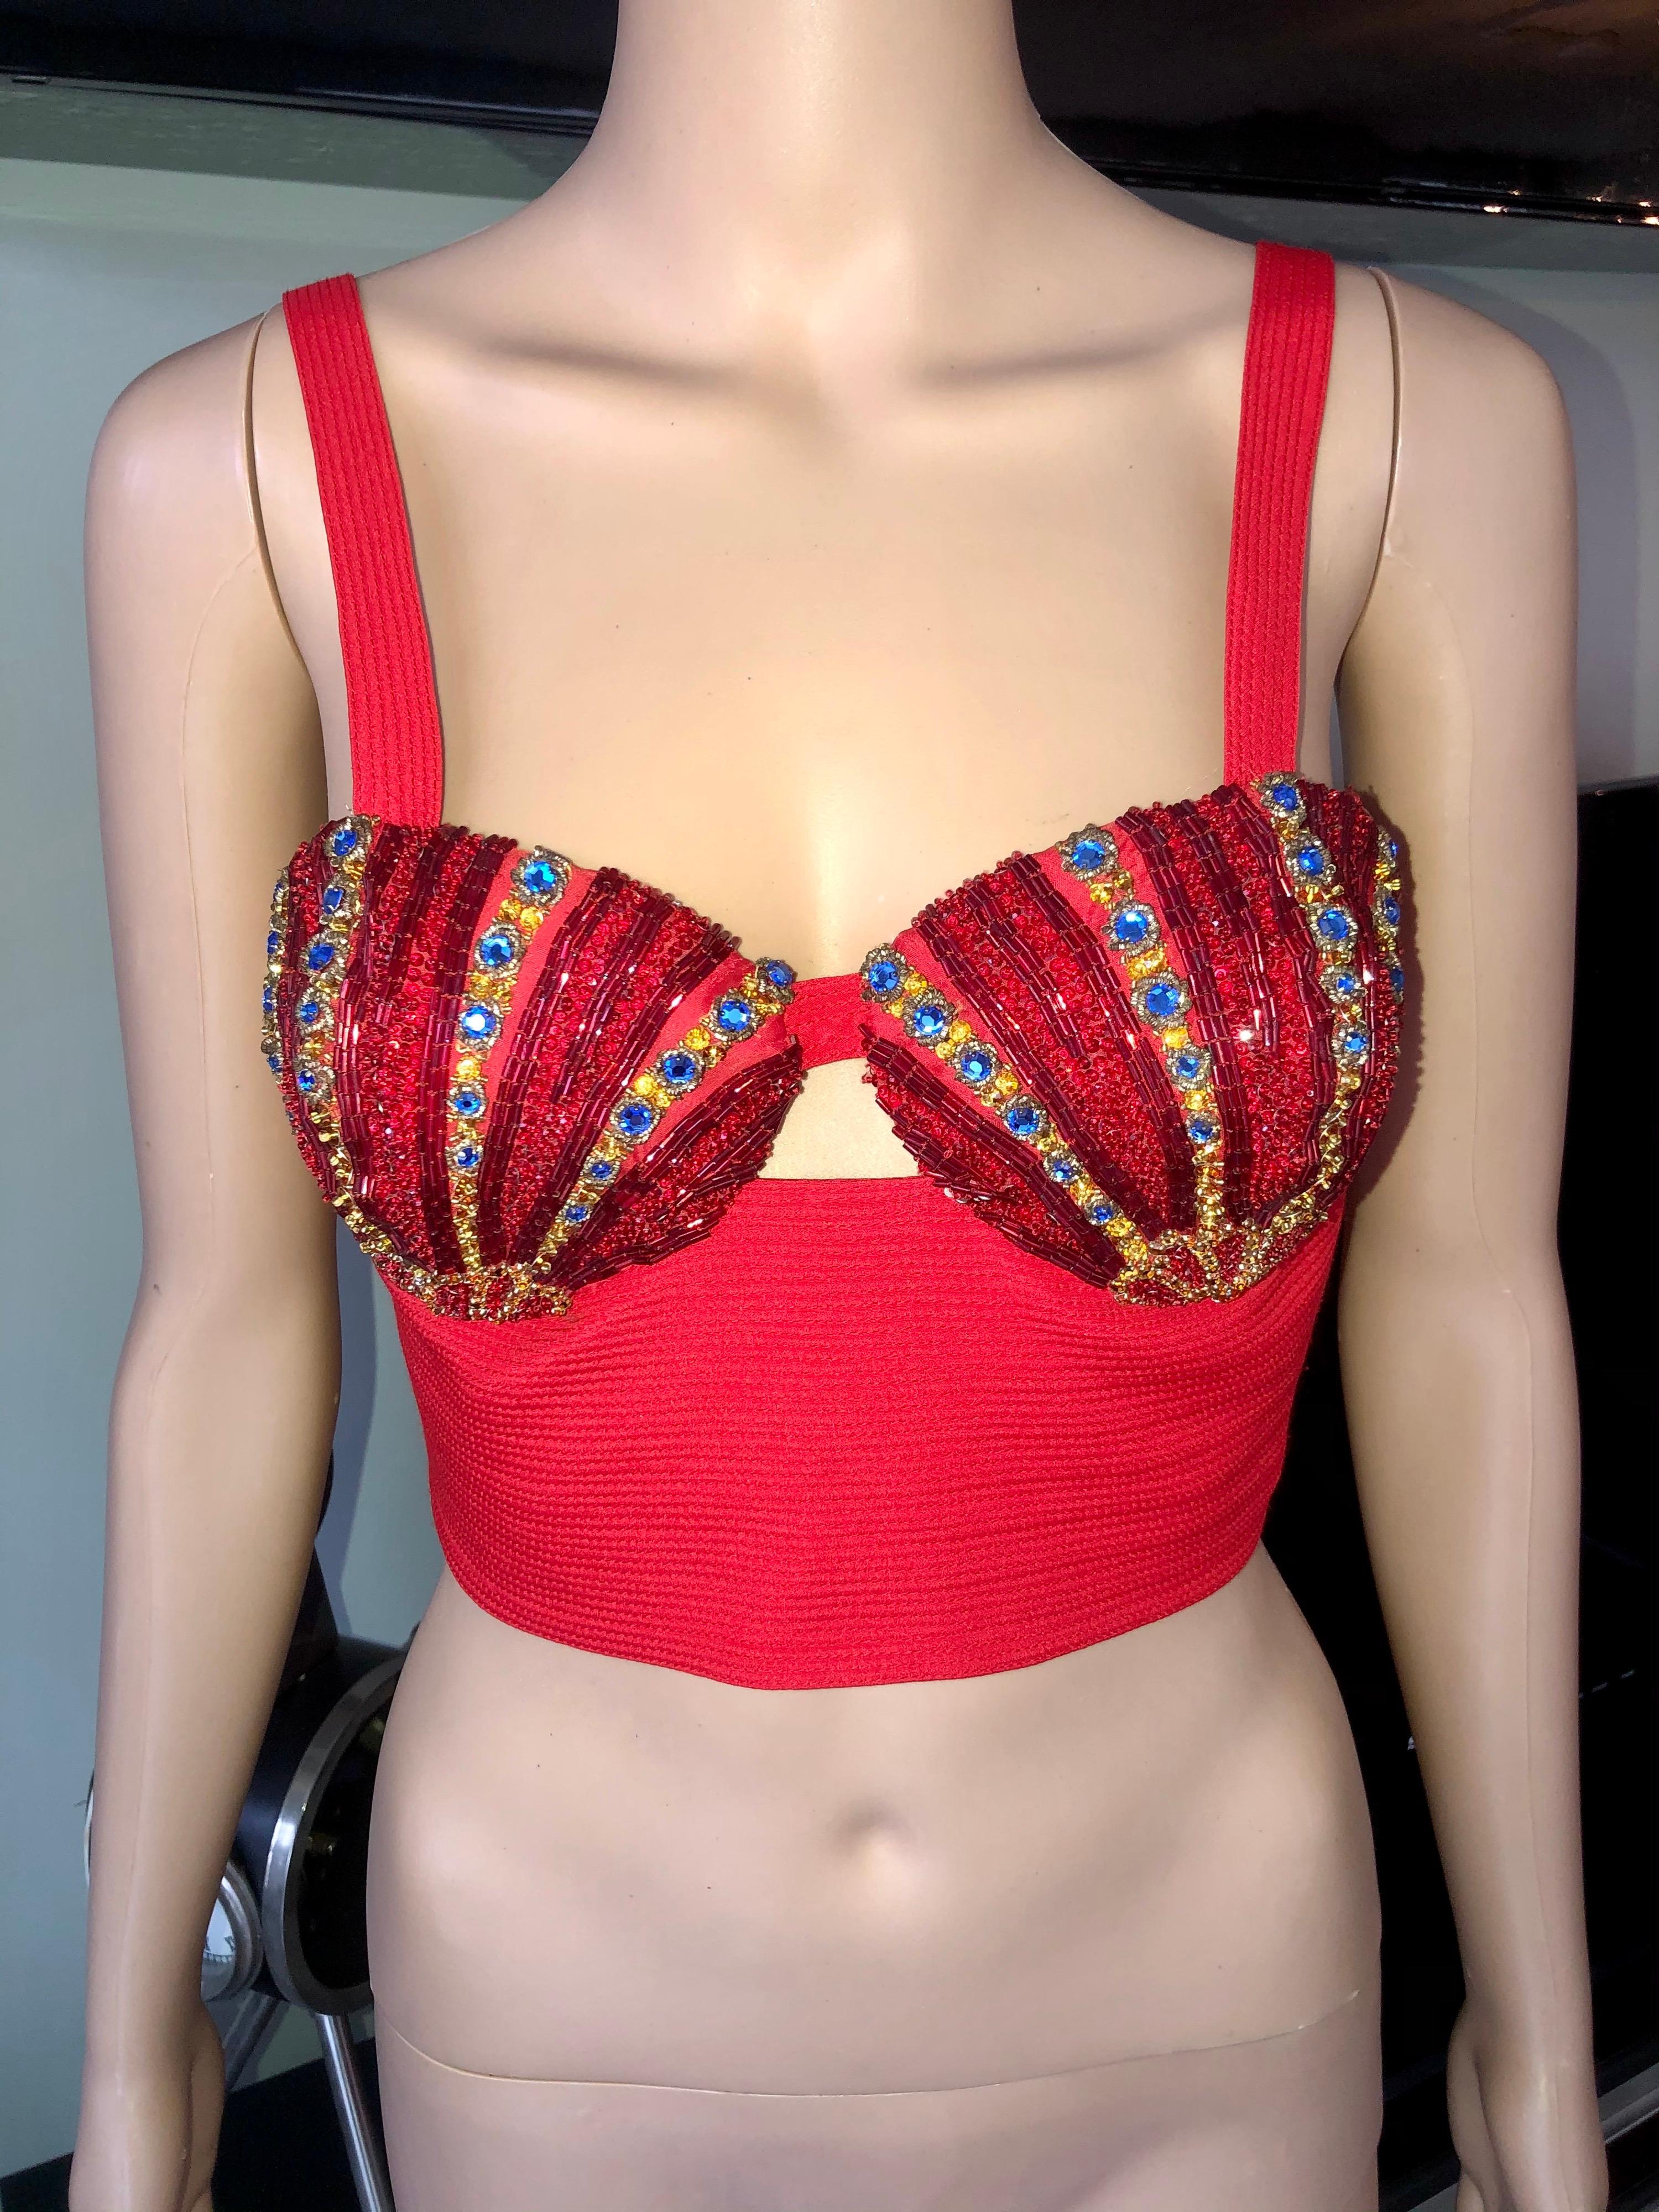 Gianni Versace S/S 1992 Couture Vintage Embellished Bra Bustier Crop Top IT 40